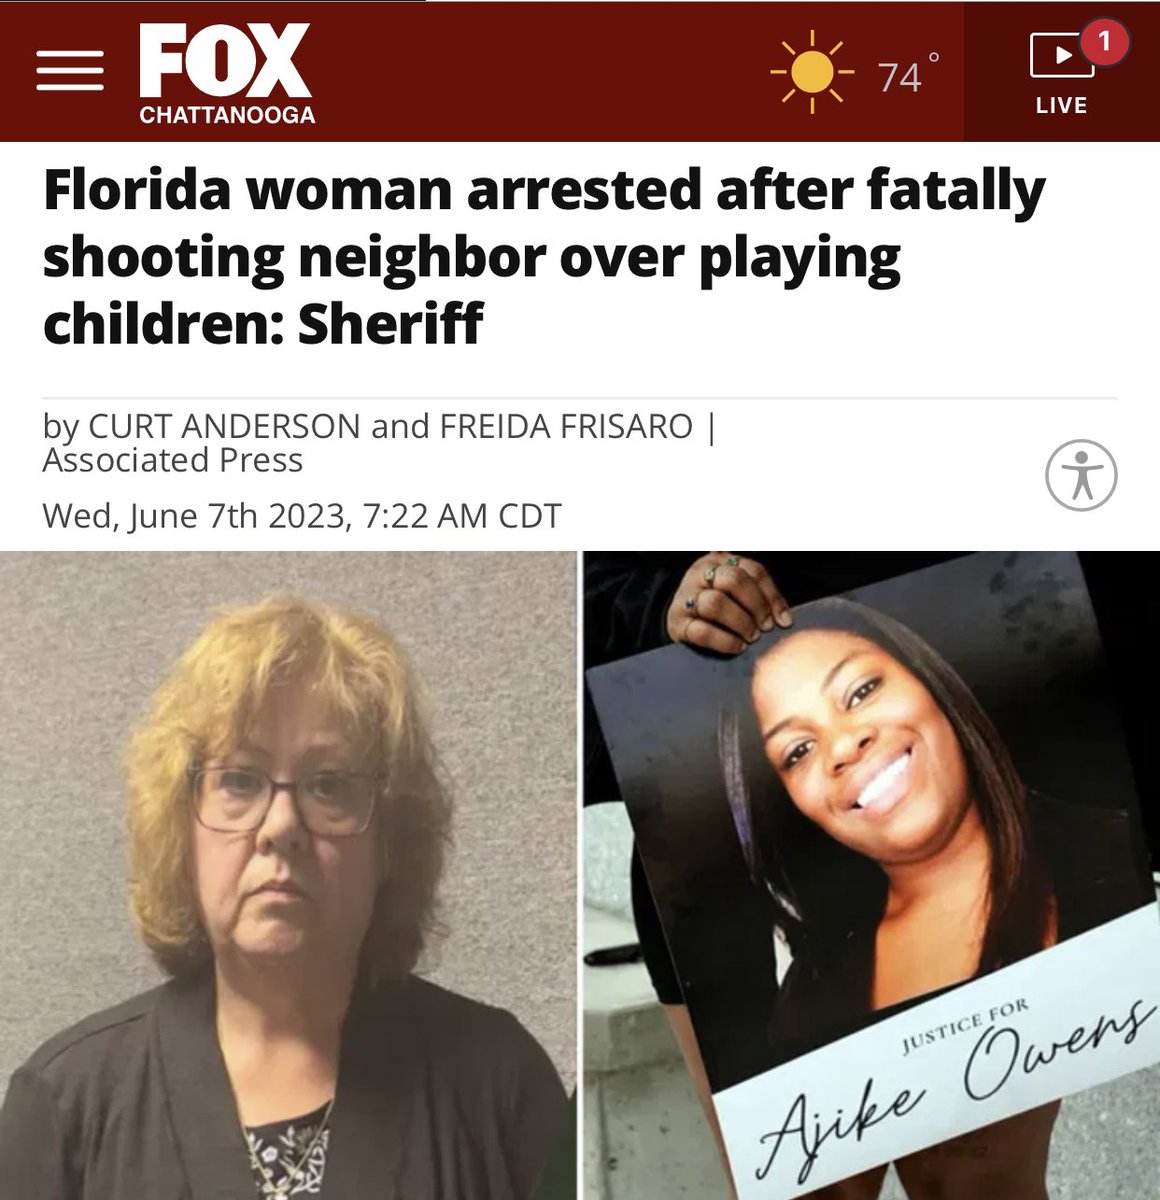 FLORIDA: “Susan Louise Lorincz, 58, who is white, arrested in the death of Ajike Owens, a Black mother of four…” 

Shot her through the front door after allegedly yelling slurs at her kids and taking the iPad they left behind. 
foxchattanooga.com/news/nation-wo…